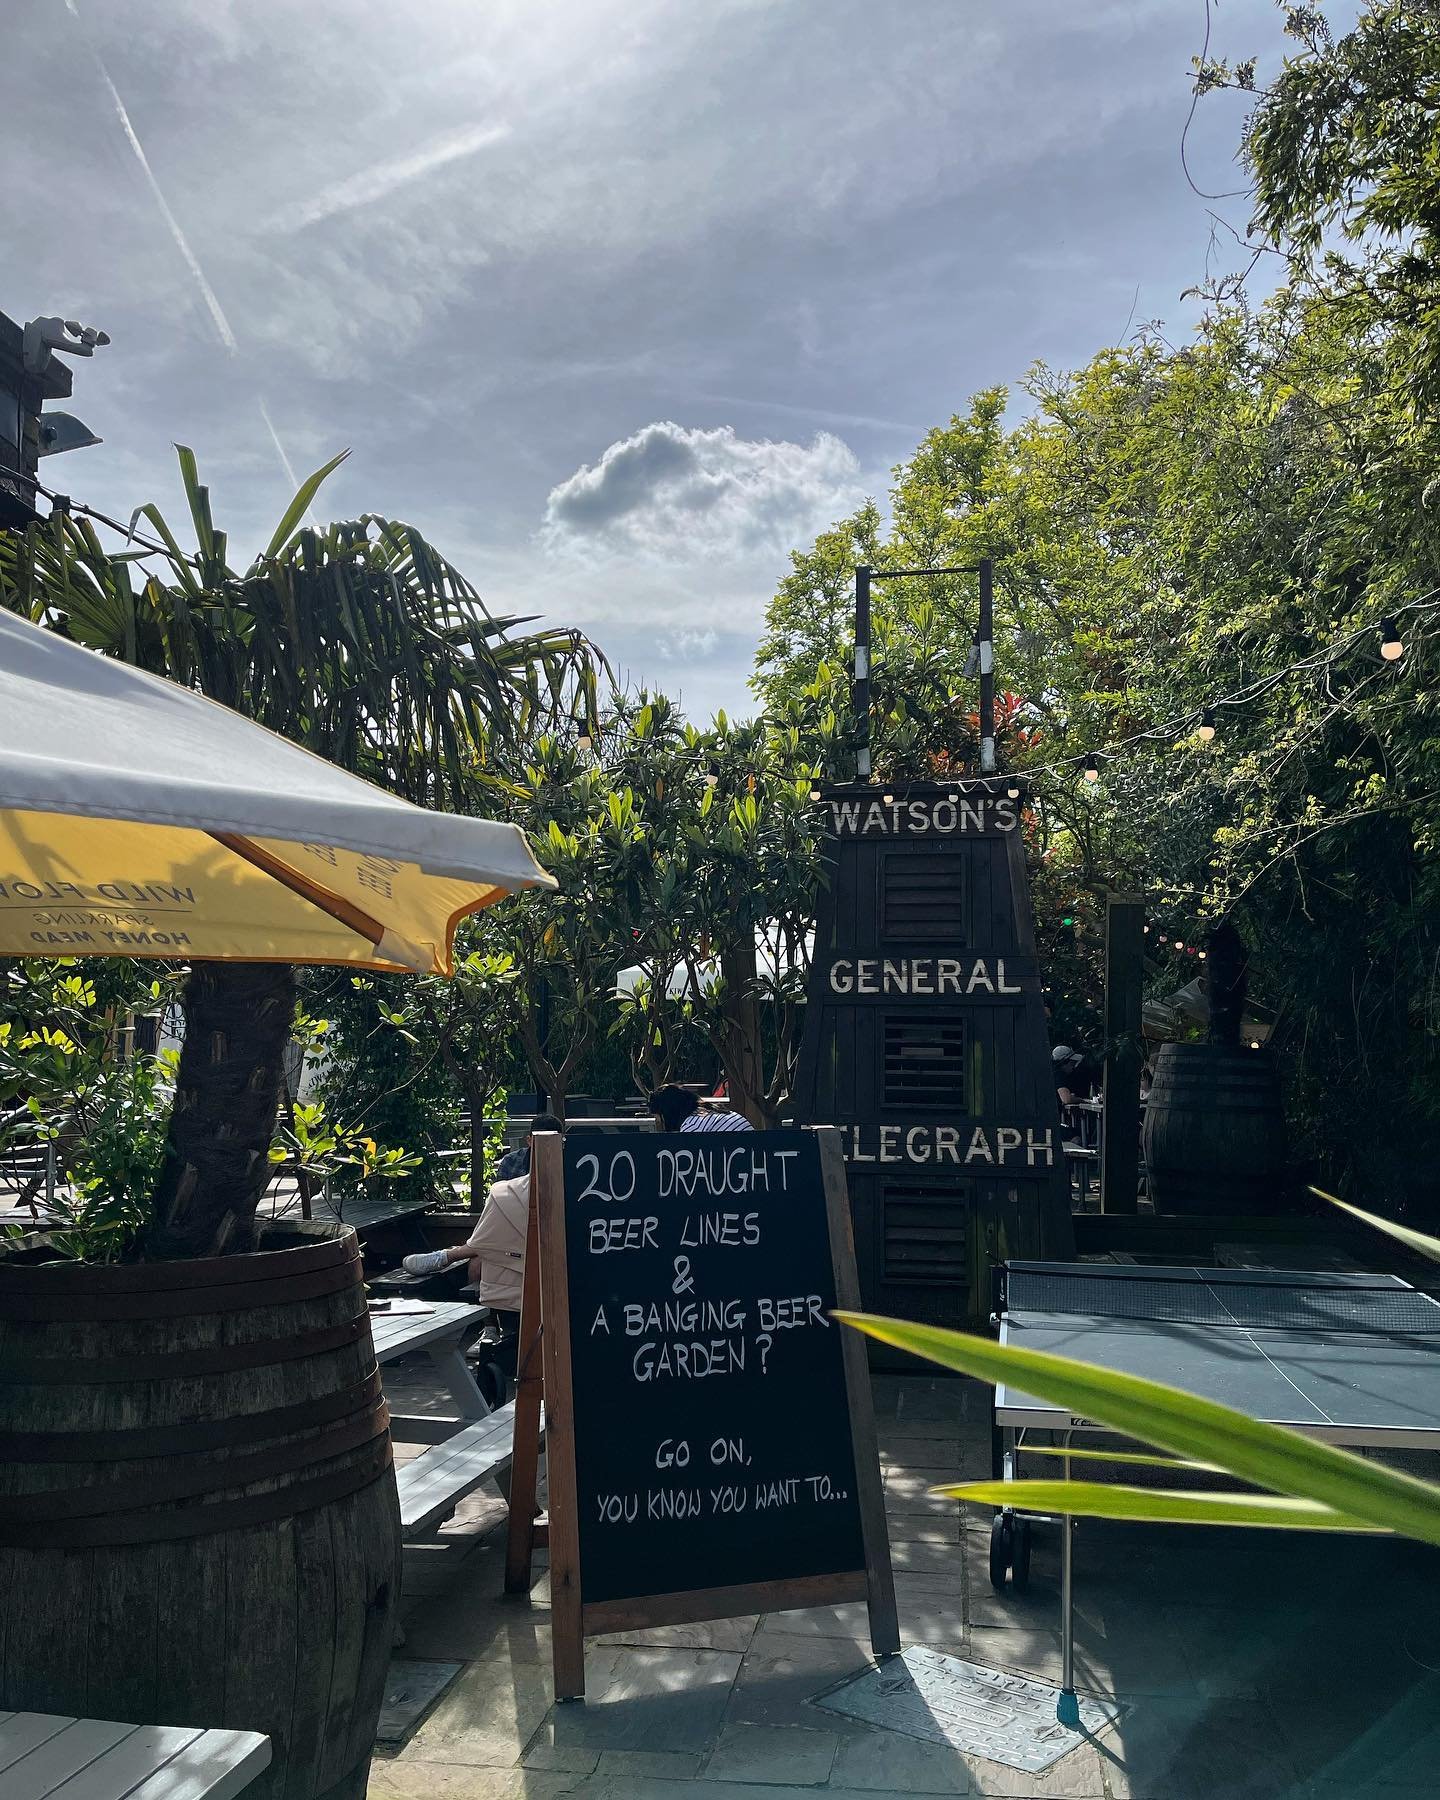 Sun&rsquo;s out&hellip; where else would you want to be? 🌞🍺 #beergarden #sun #eastdulwich